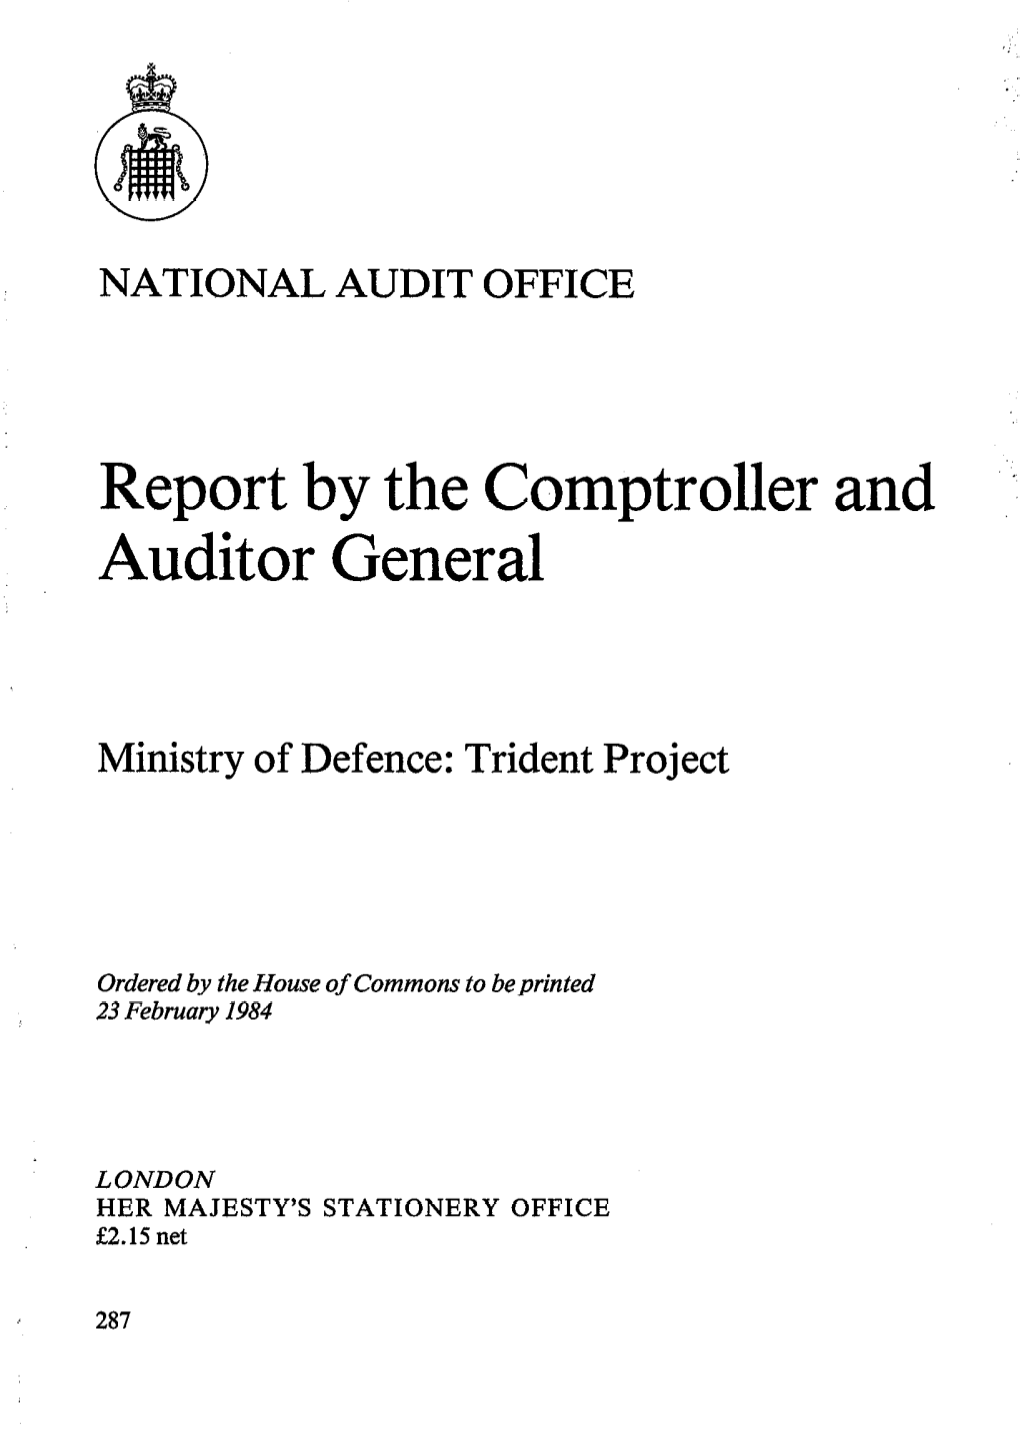 NAO Report (HC 287 1983/84): Ministry of Defence